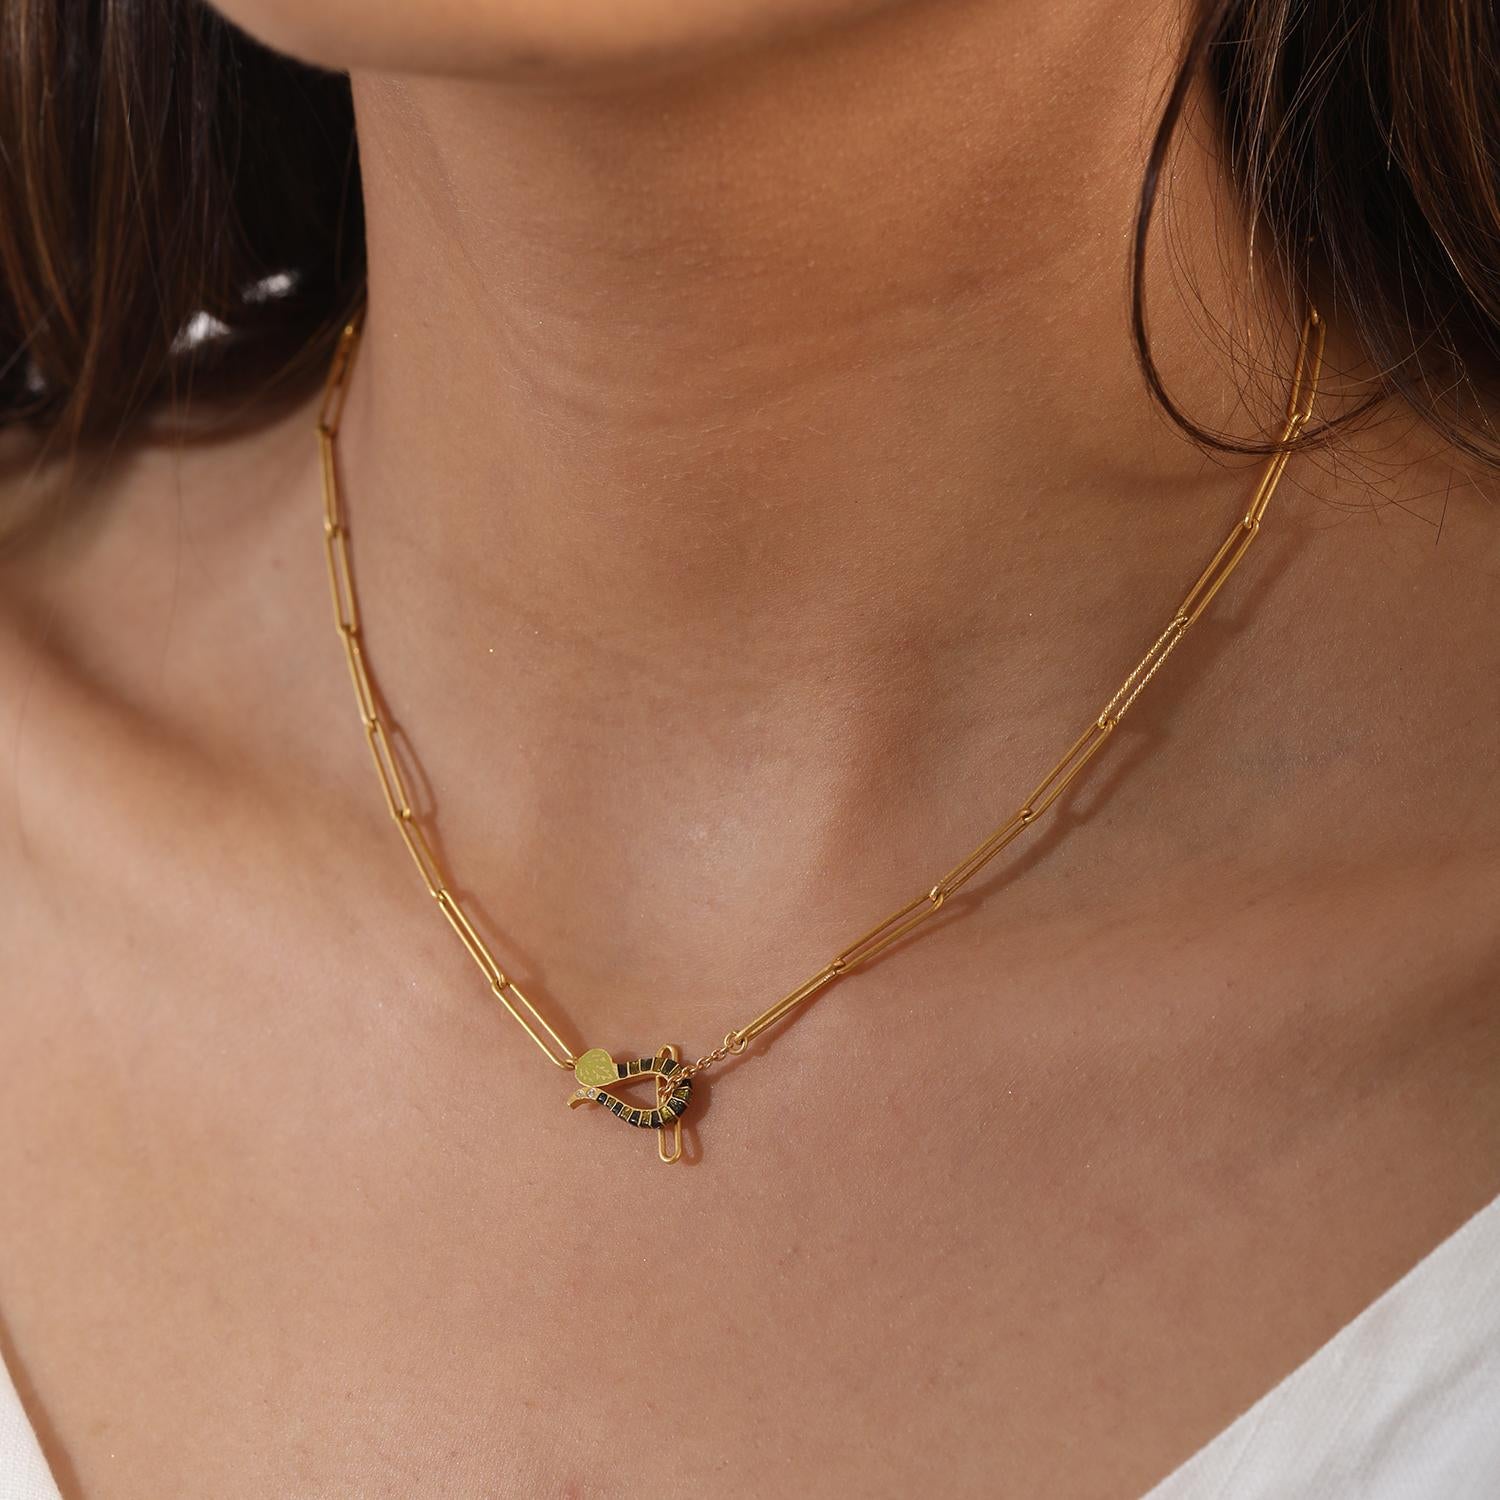 Brilliant Cut 22K Gold & Enamel Paperclip Chain Necklace with Toggle Clasp Handmade by Agaro For Sale